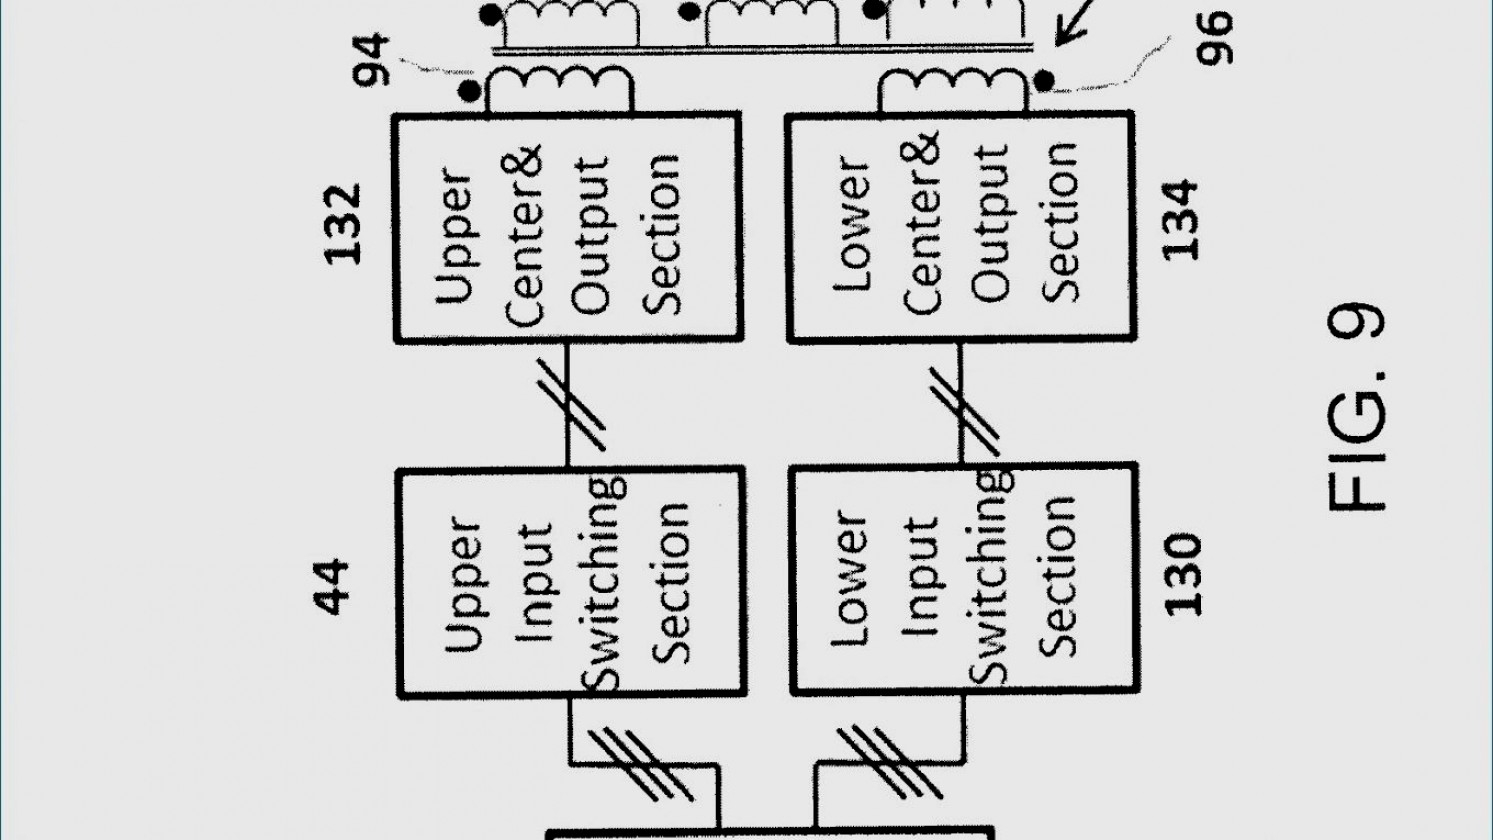 Awesome Of 3 Phase Motor Wiring Diagram 12 Leads Three Connections - 3 Phase Motor Wiring Diagram 12 Leads